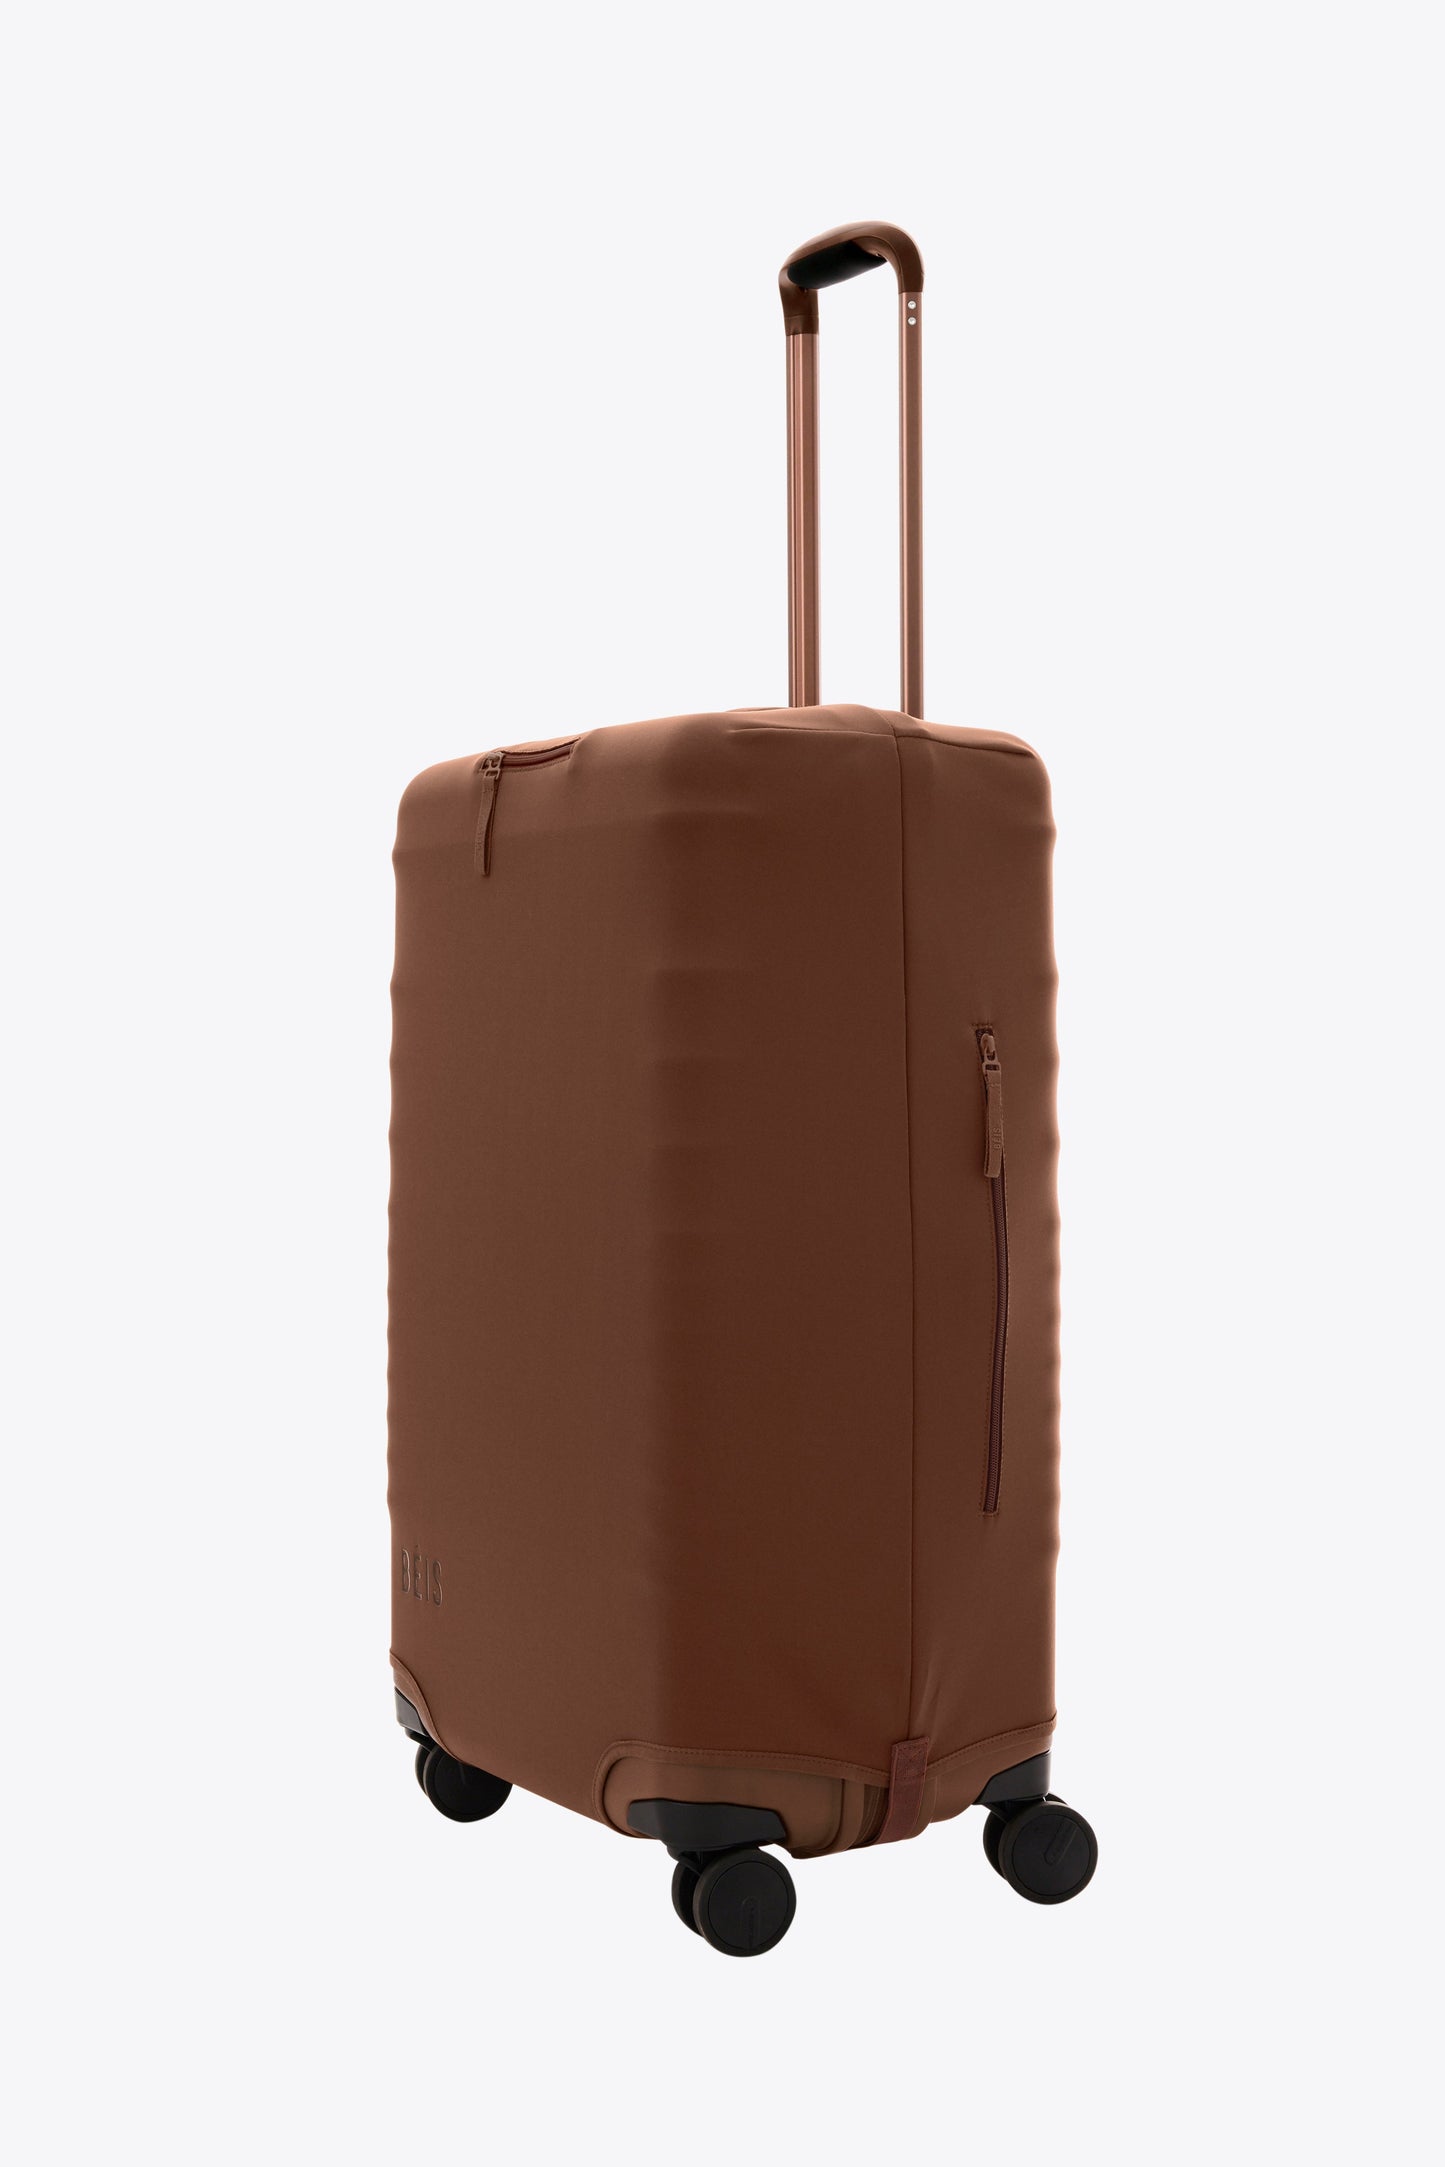 The Medium Check-In Luggage Cover in Maple